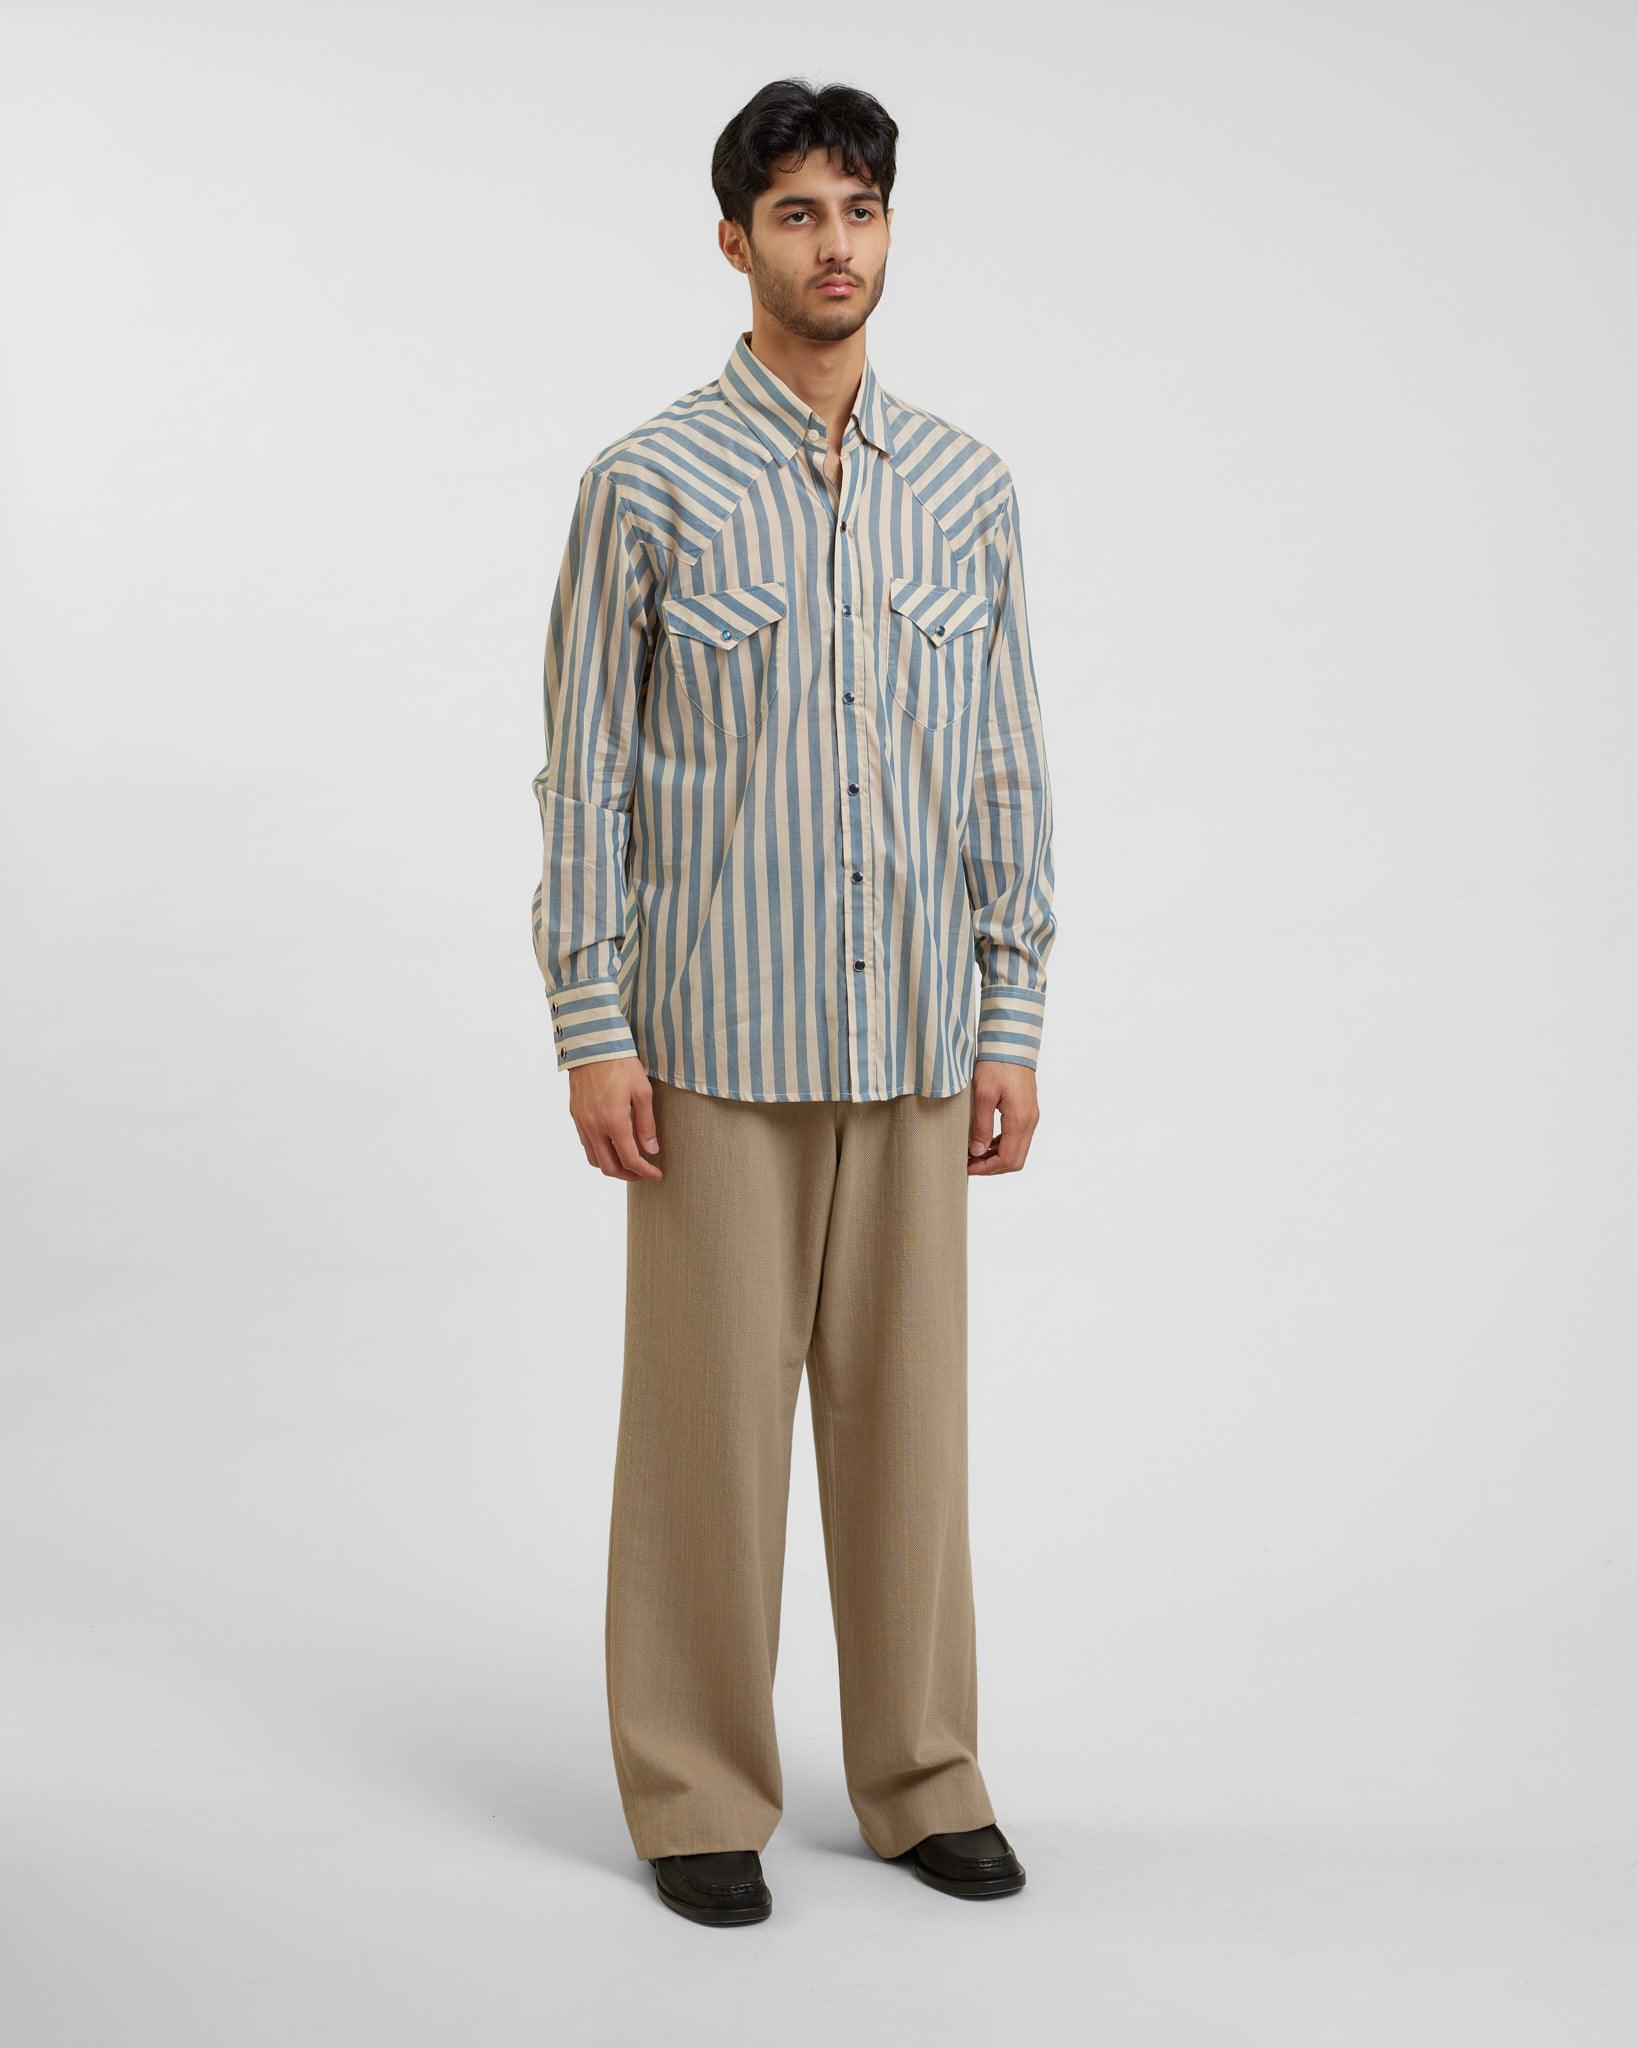 Western Shirt (Blue, Cream and White Stripes) - {{ collection.title }} - Chinatown Country Club 